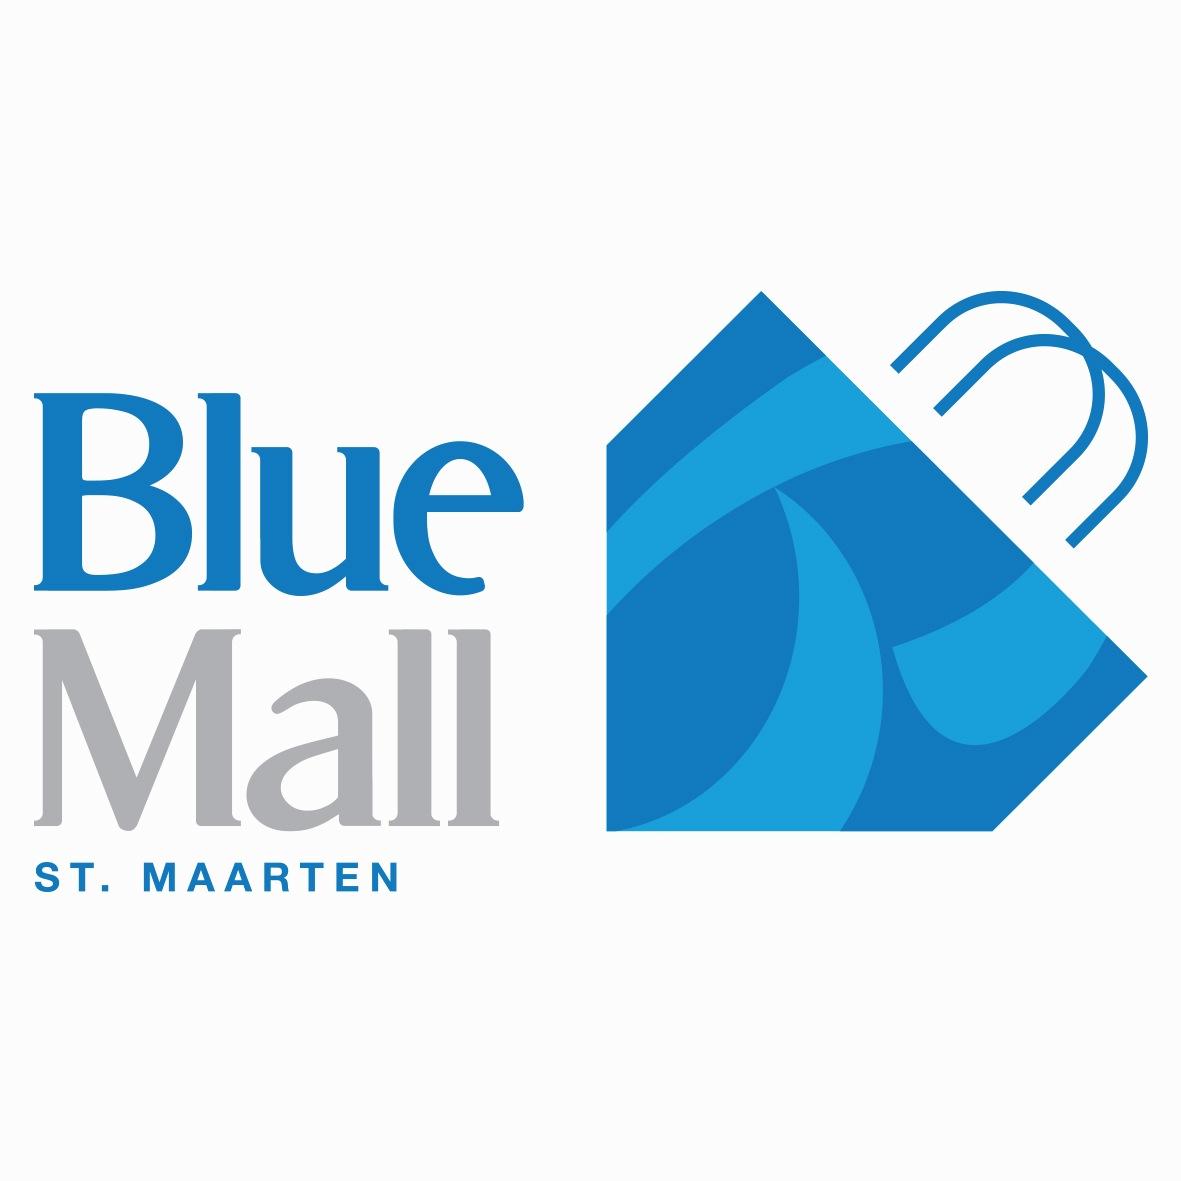 The new generation shopping mall in St. Maarten | Open Monday to Saturday from 11am to 7pm | Sunday 12m to 7pm | Restaurants everyday from 12m to 10pm